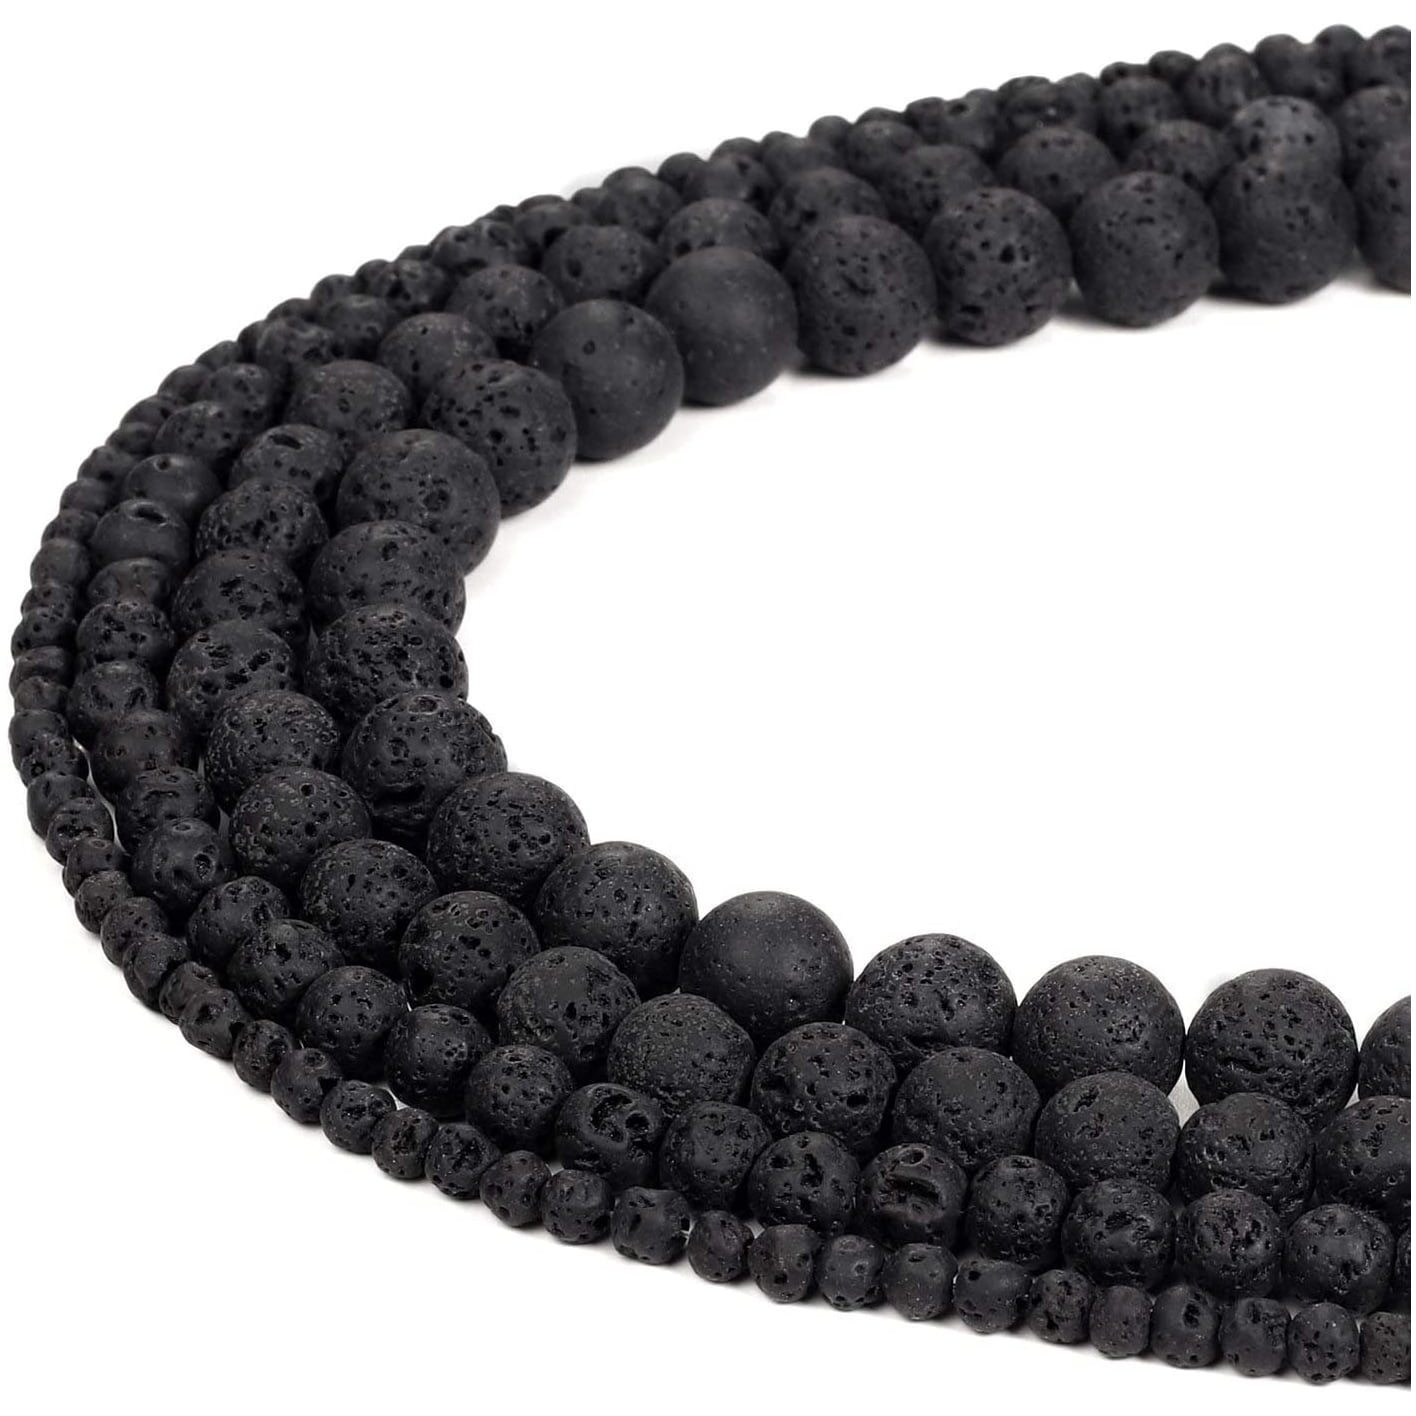 1 Strip Black Volcanic Stone Beads Bead Chains Jewelry Findings Decoration  DIY 